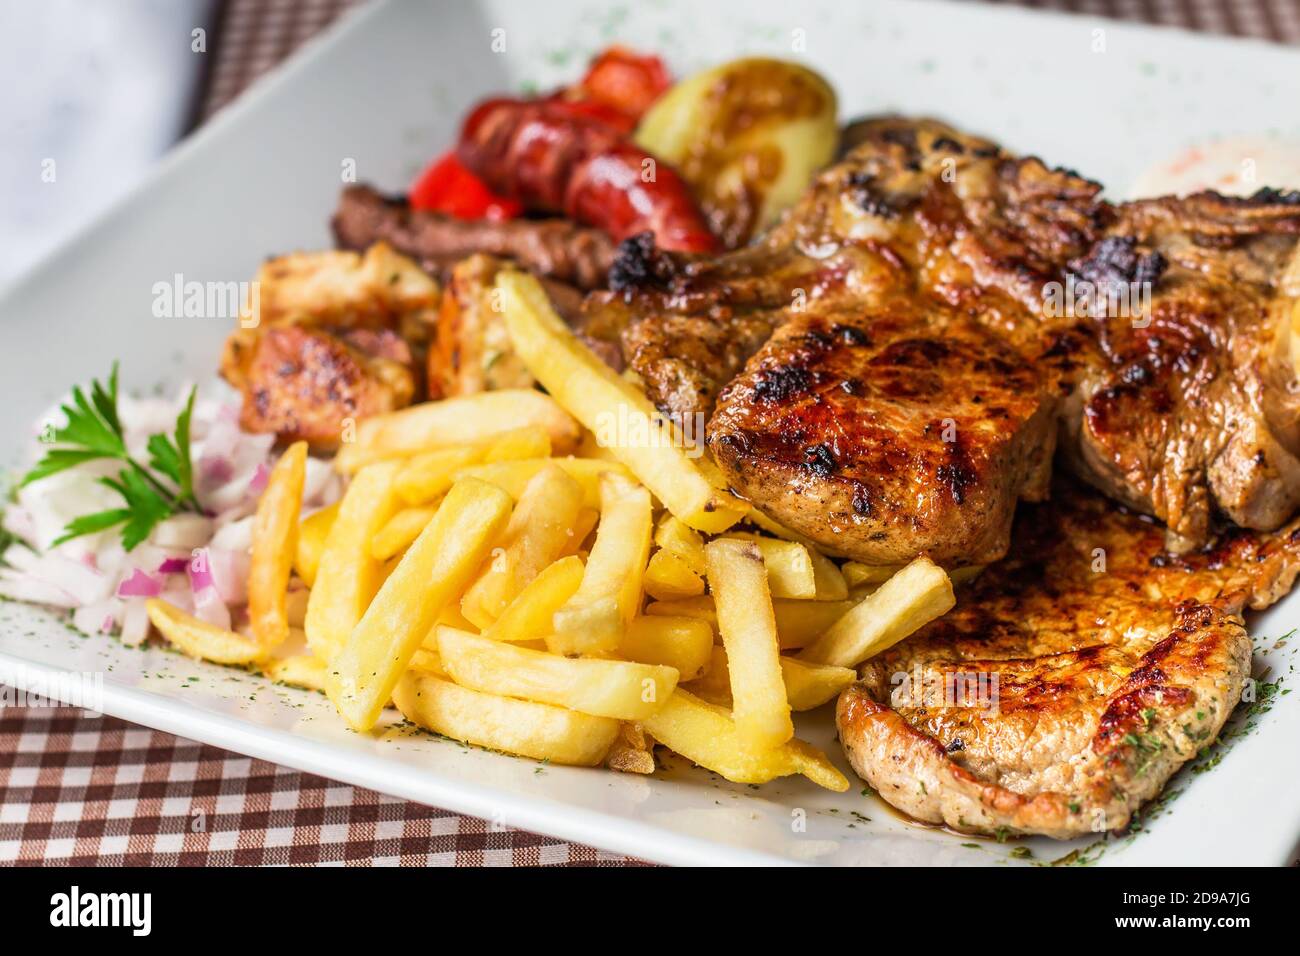 Traditional Balkan mixed grill dish - different types of bbq meat and vegetables with fries, selective focus Stock Photo